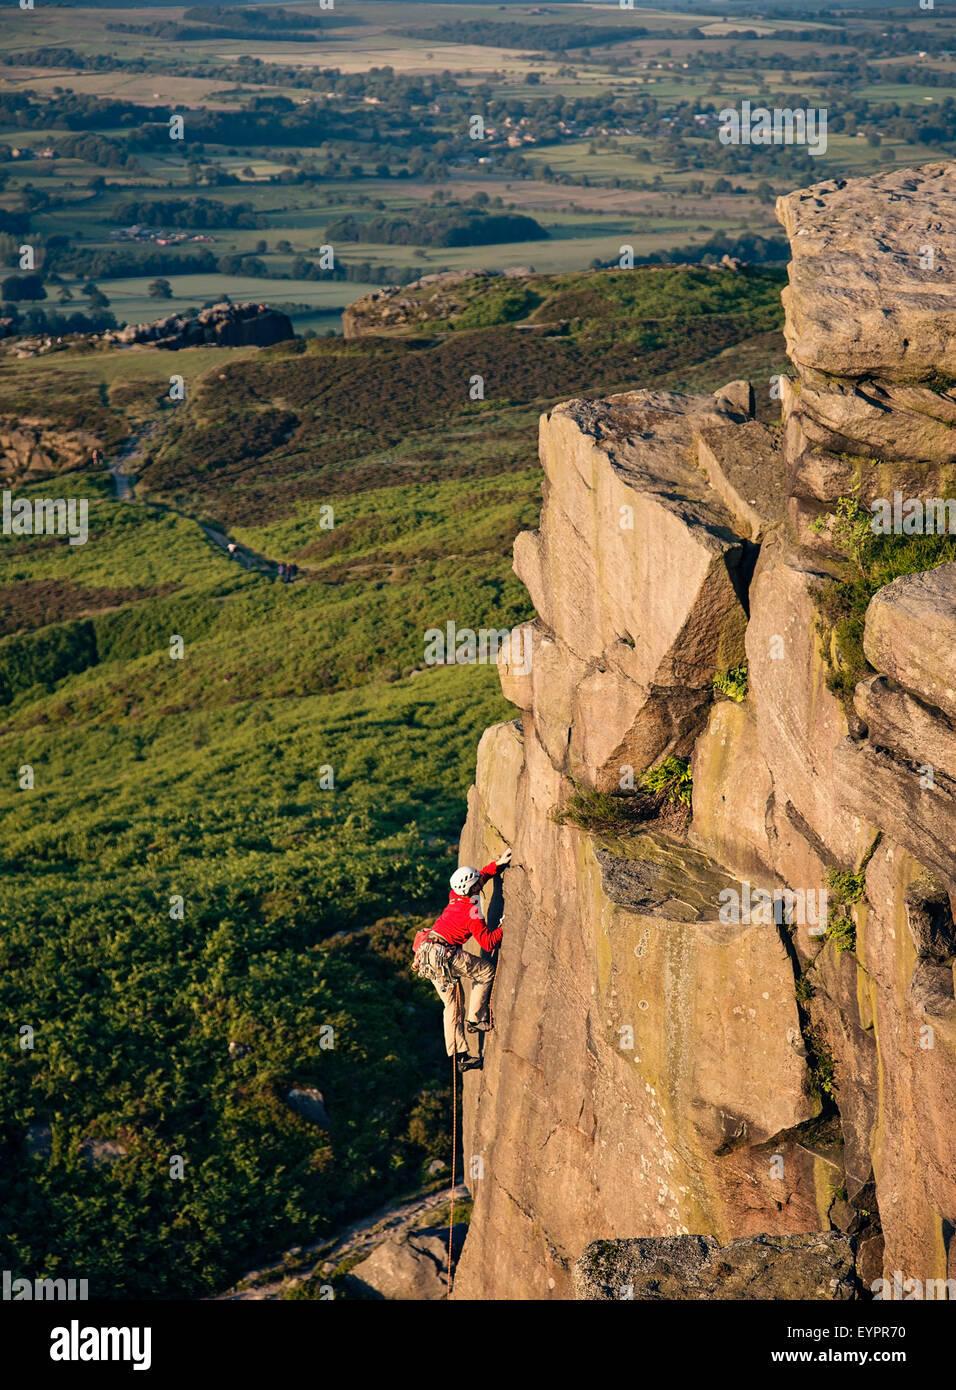 A climber climbing up Ilkley Crags on Ilkley moor Stock Photo